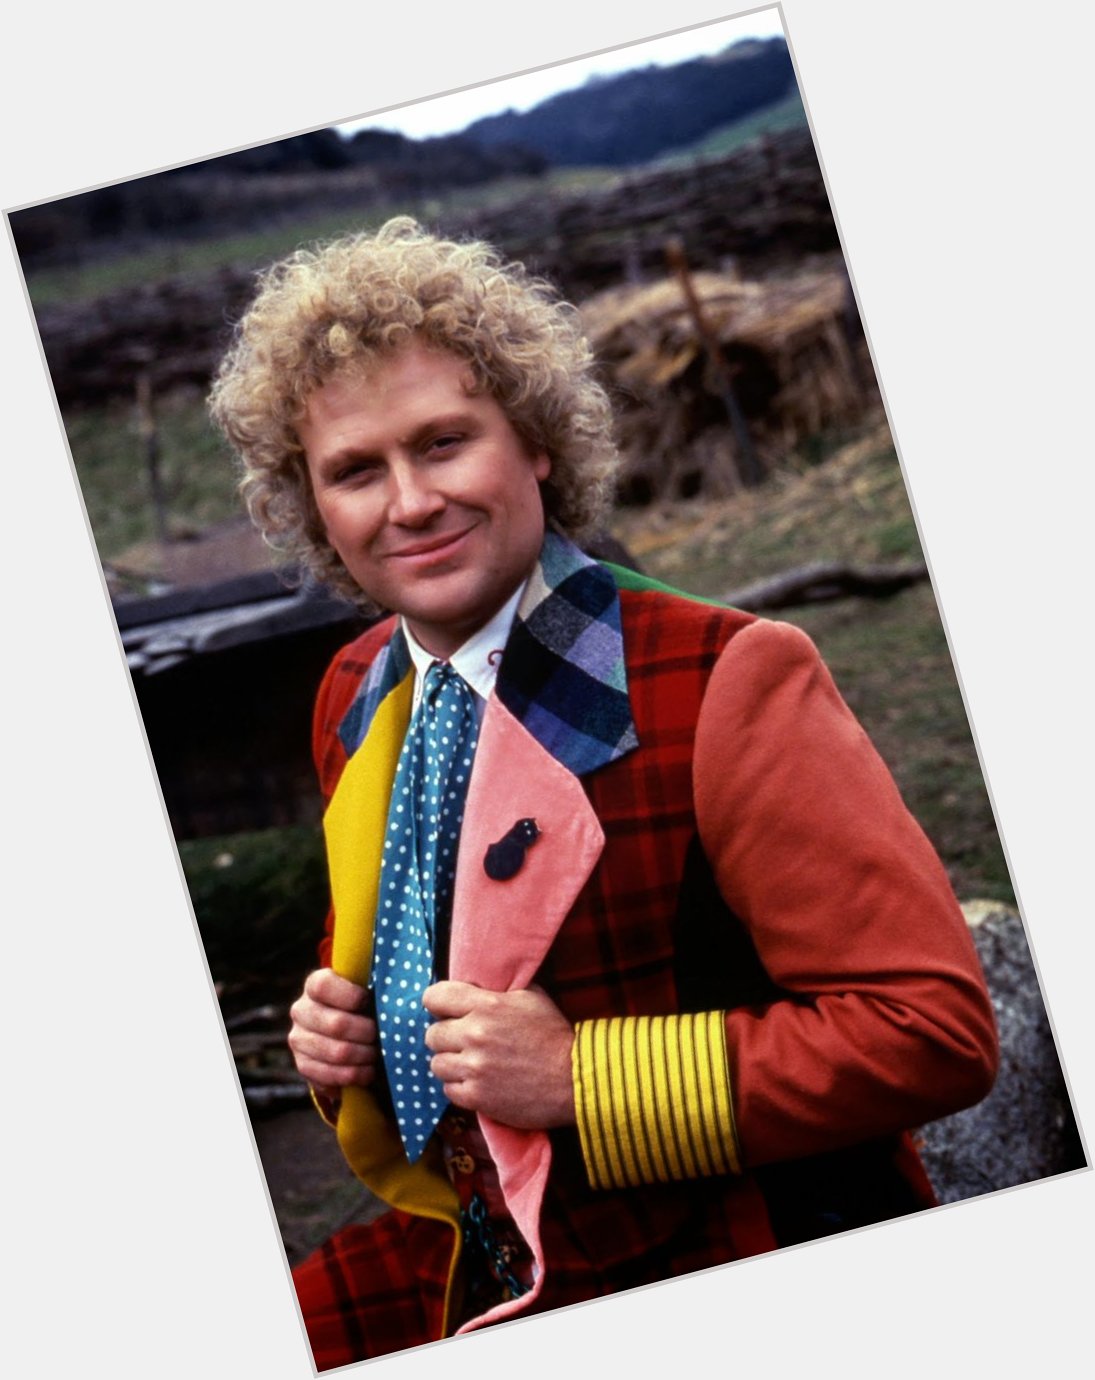 Happy Birthday to The Sixth Doctor Colin Baker! 